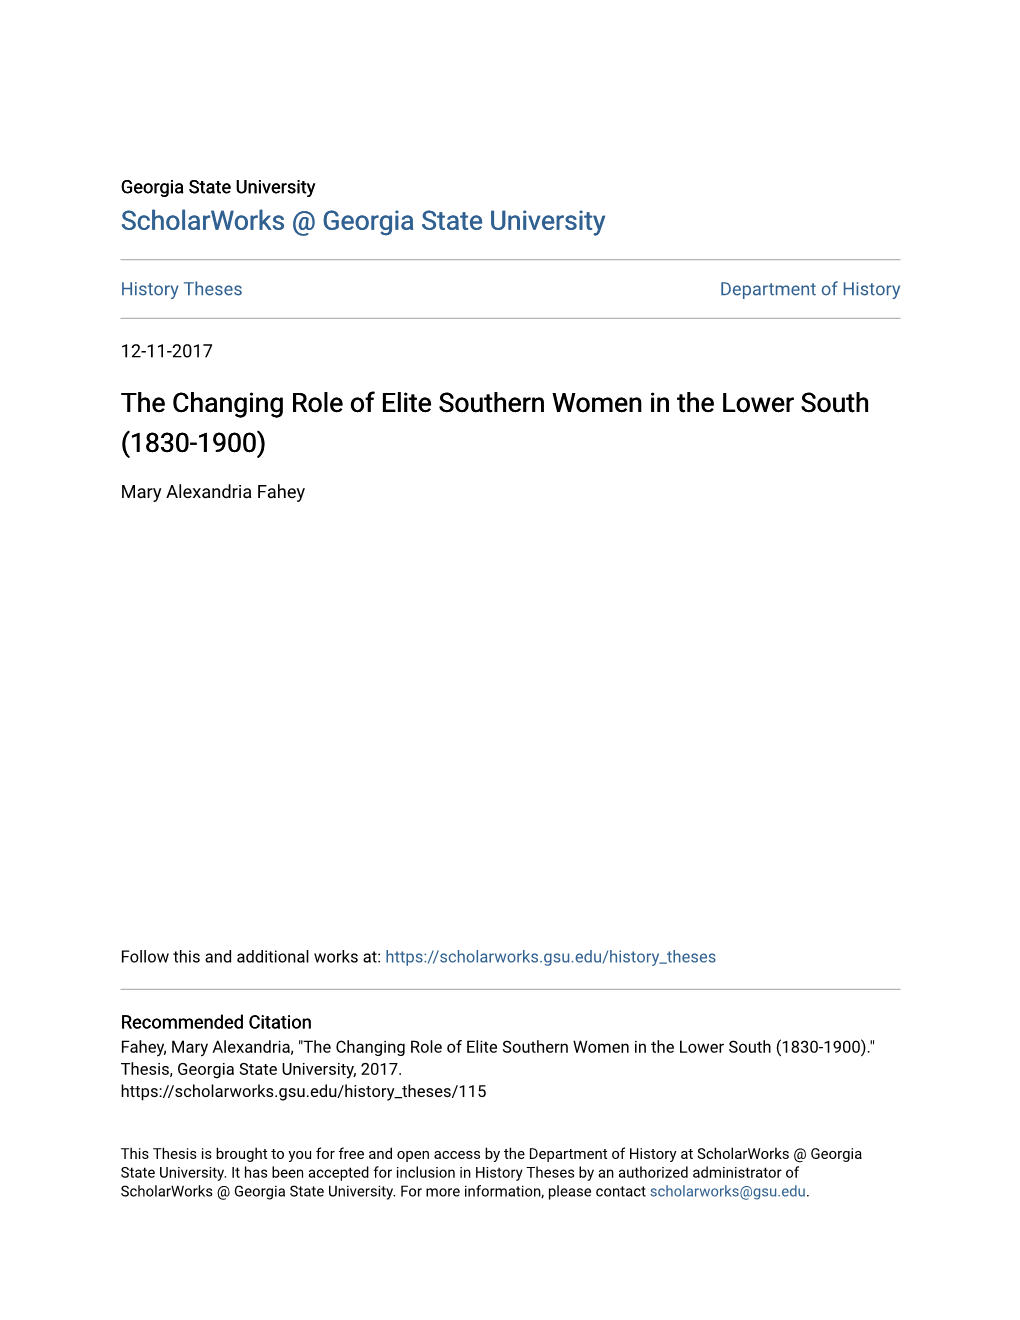 The Changing Role of Elite Southern Women in the Lower South (1830-1900)